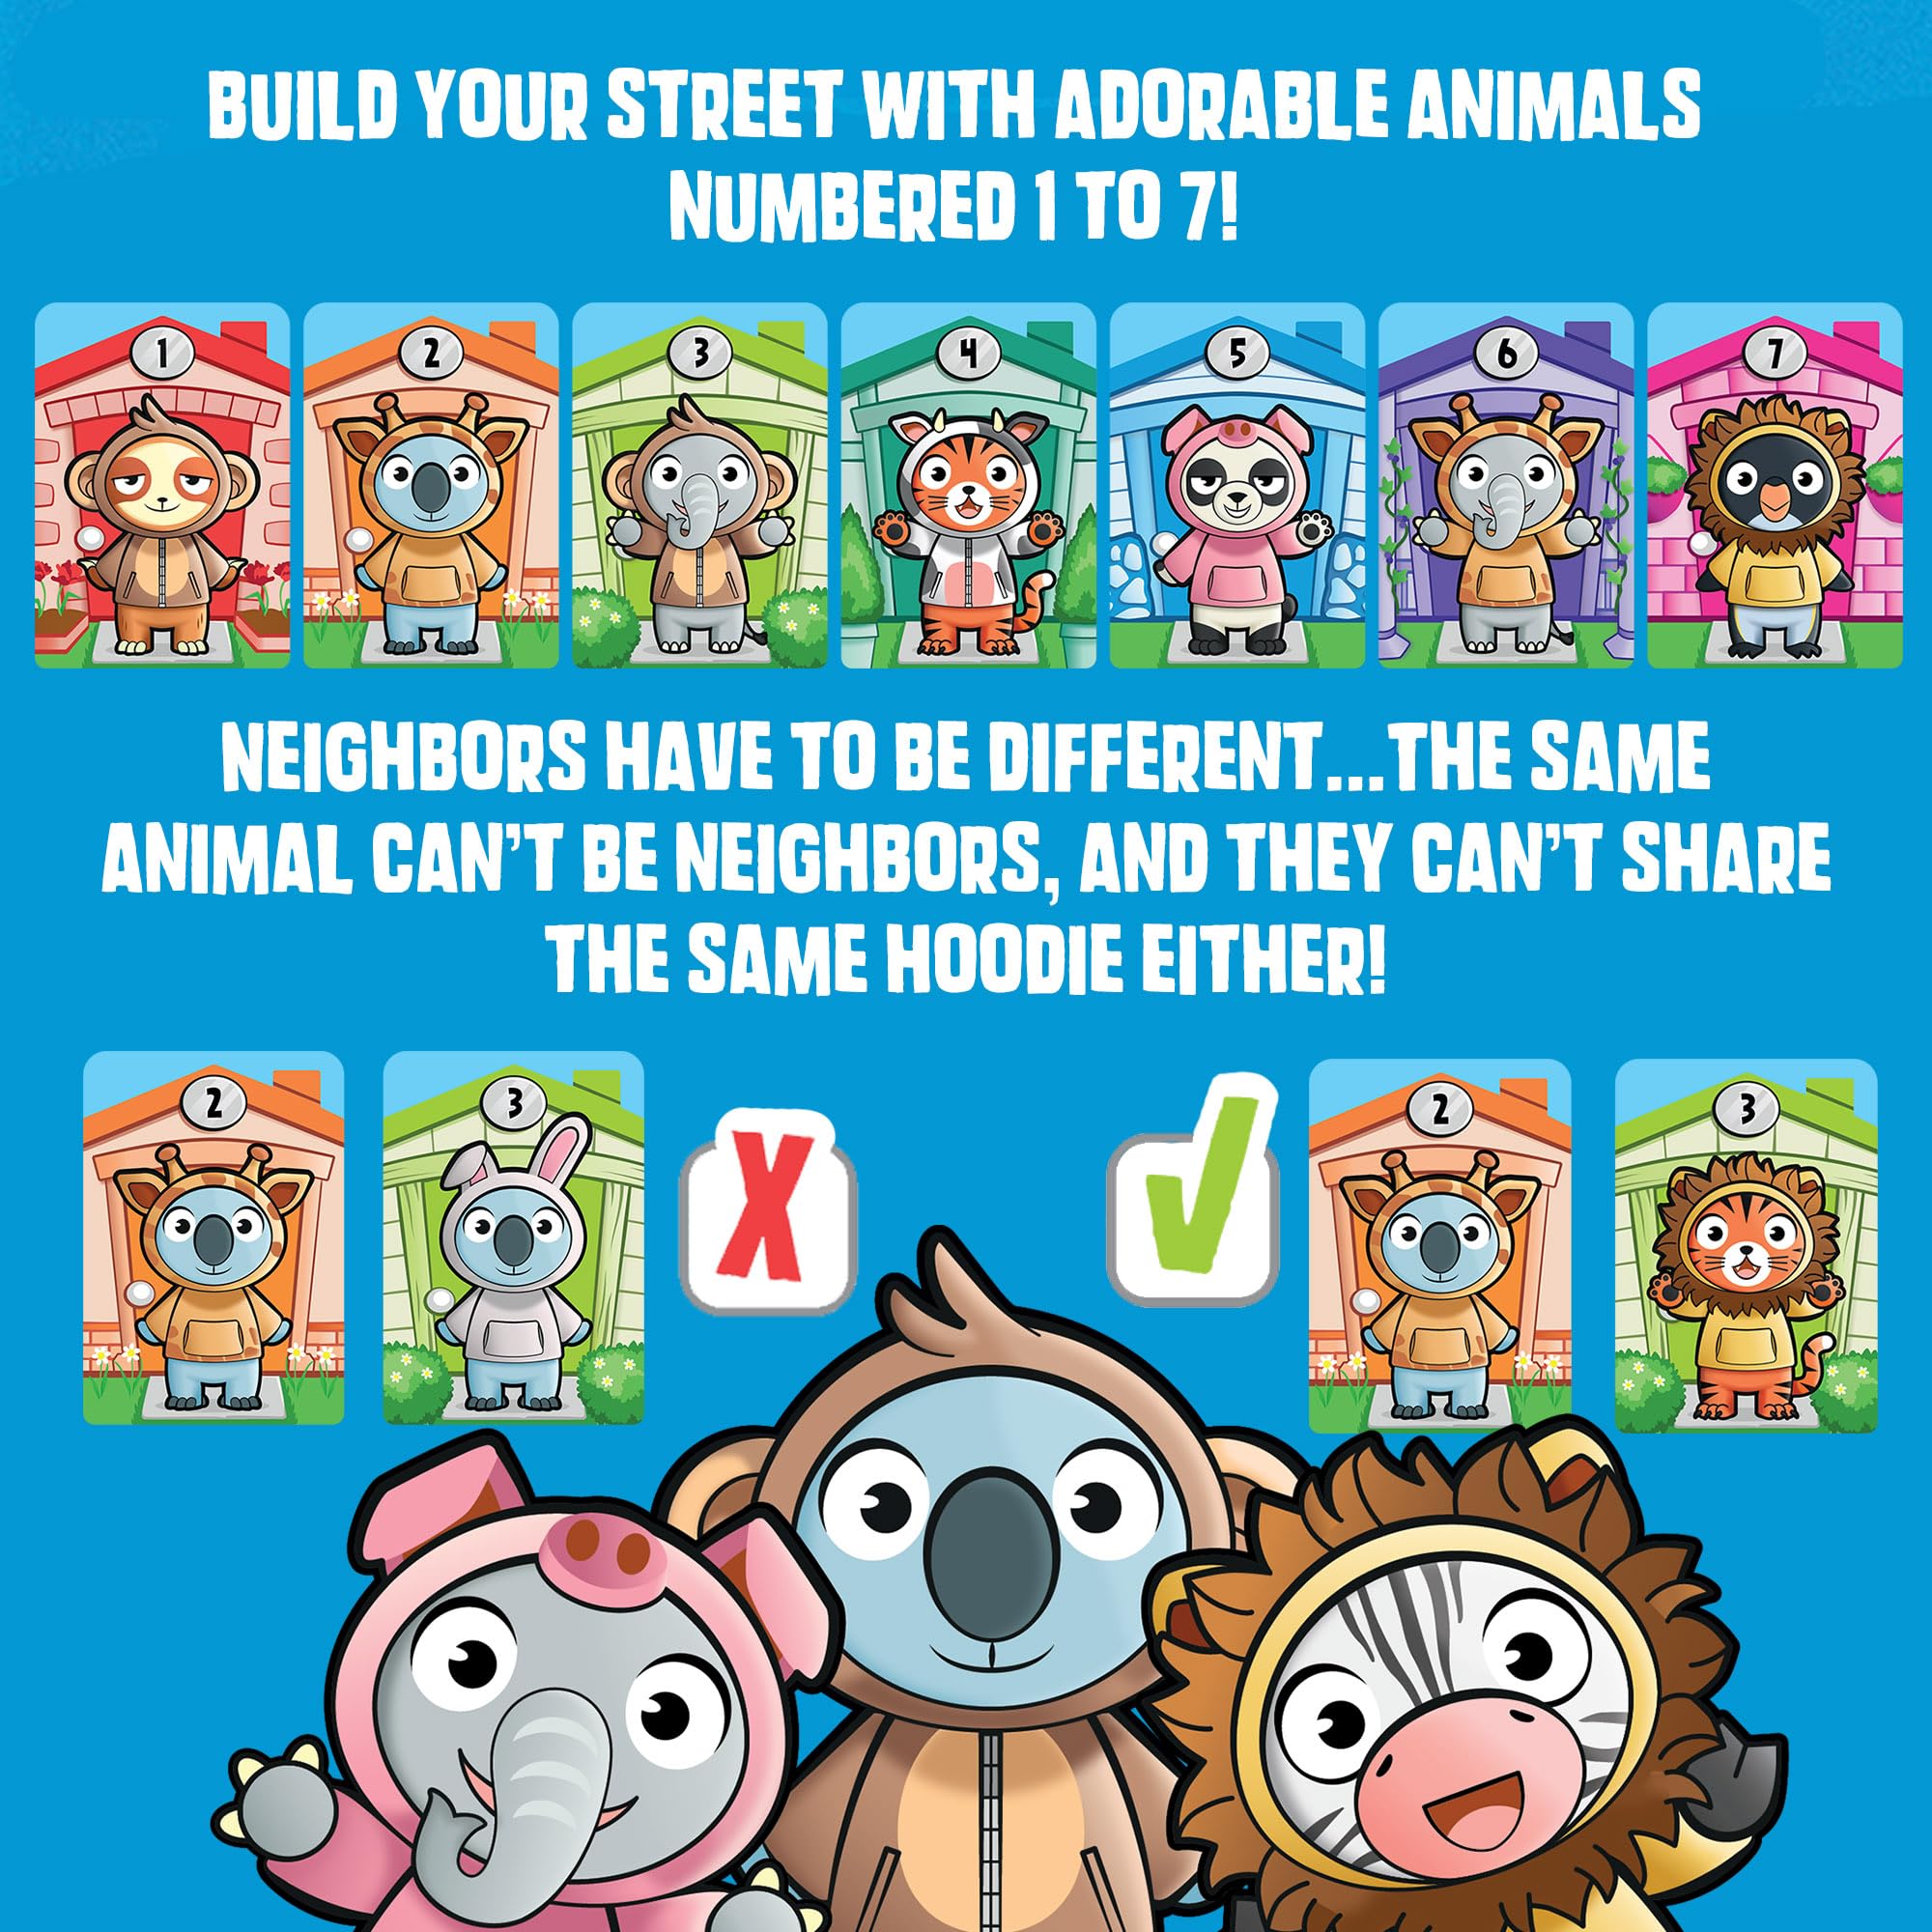 NeighborHoodies Kids Card Game - Easy and Fun Preschool Play Activity Critical Thinking and Counting Learning Game with Cute Animals for Kids Ages 5-7